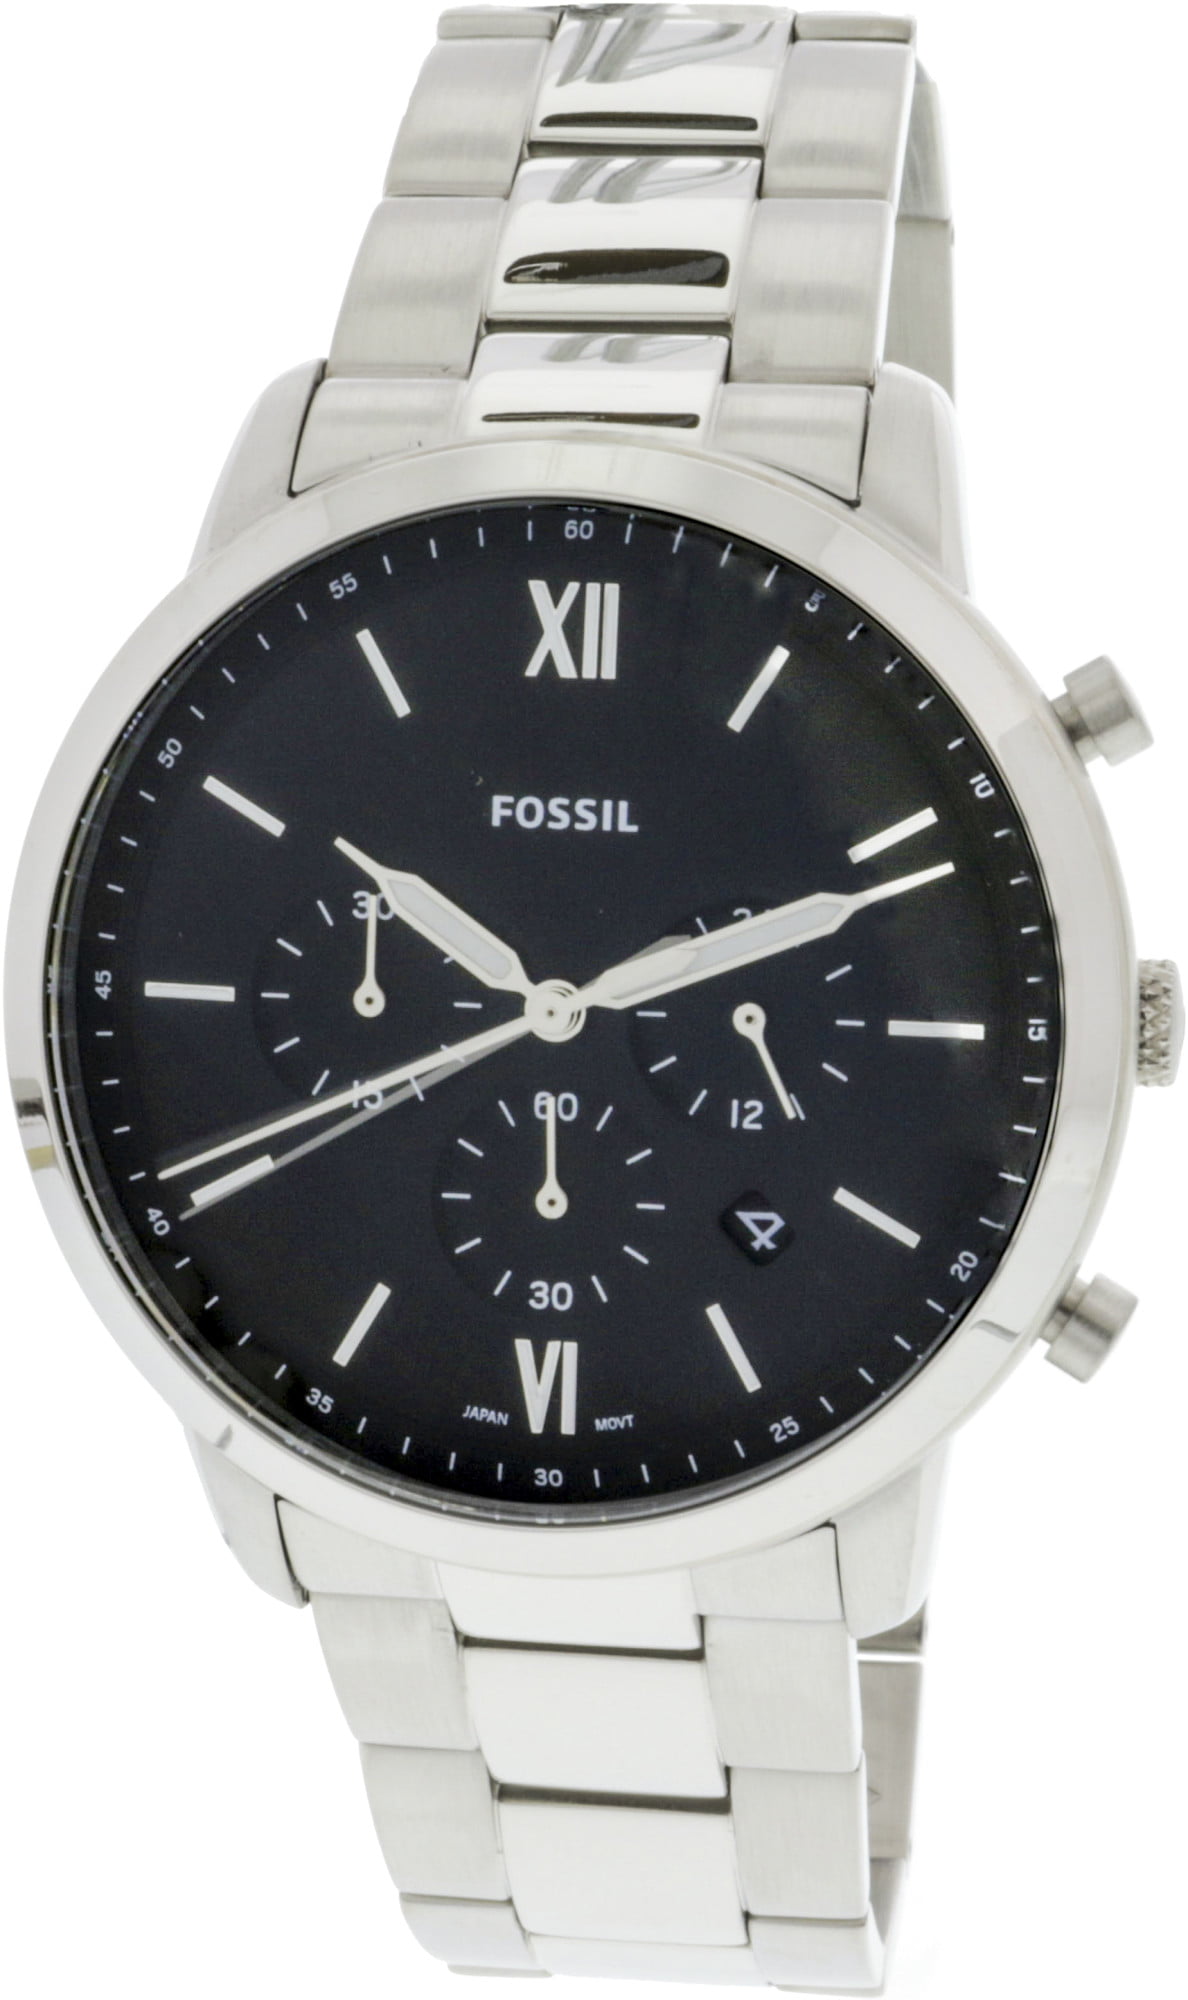 Fossil Men's Neutra Chronograph FS5384 Silver Stainless-Steel Japanese ...